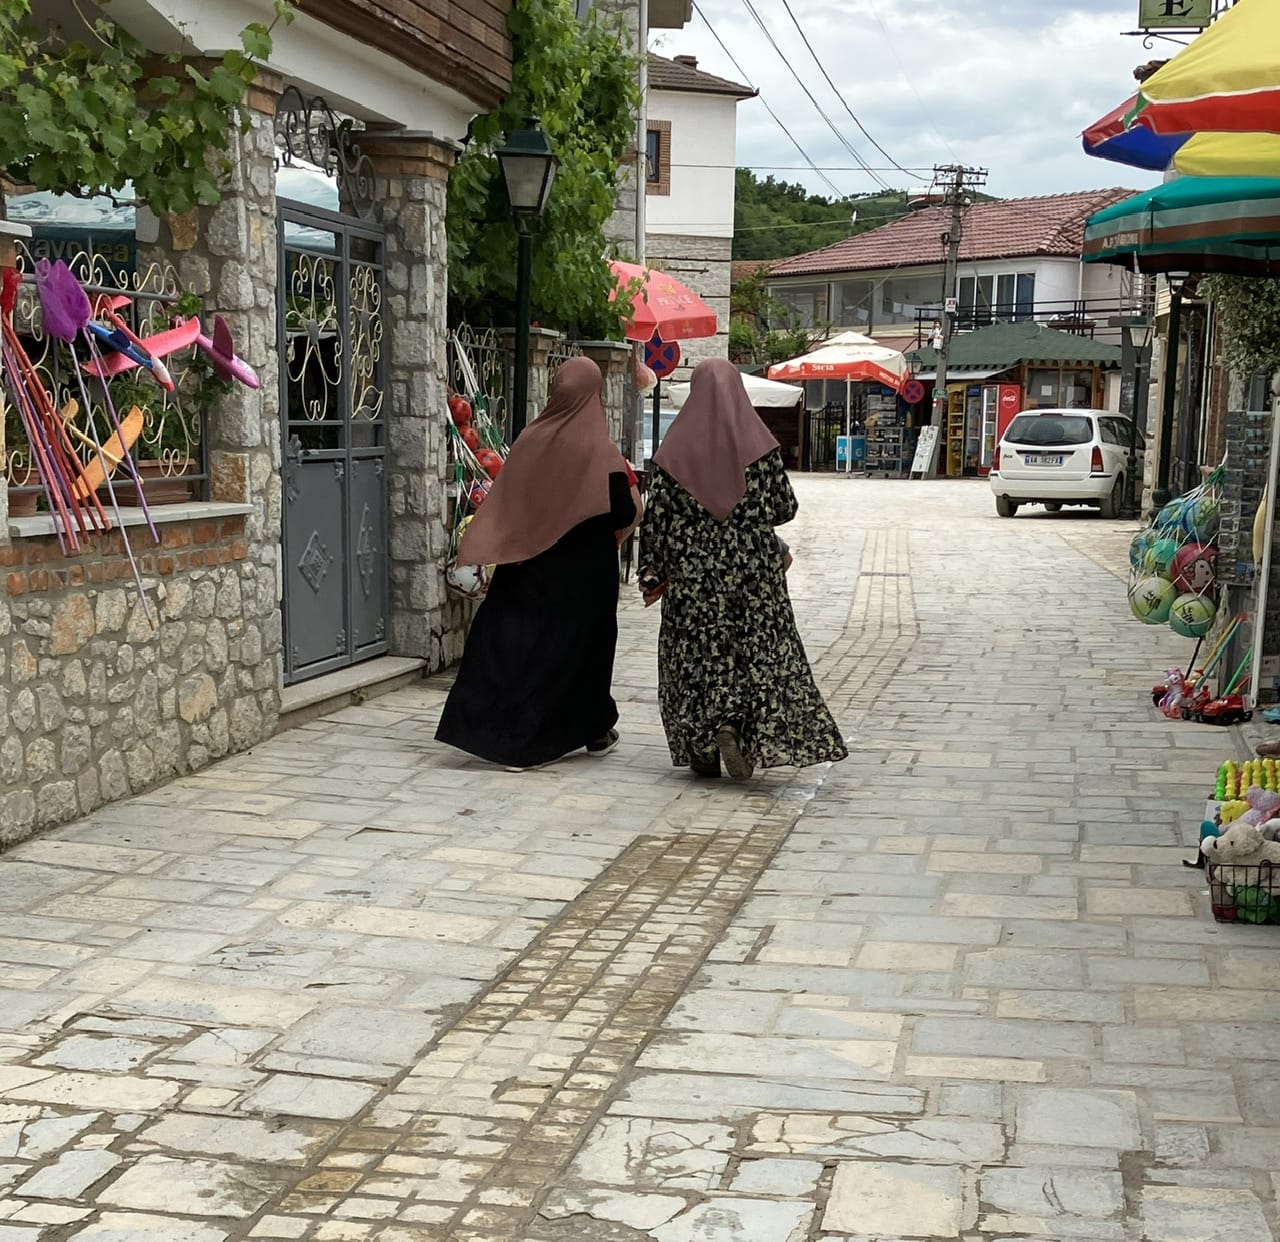 Albania - Part 2, architecture, pyramid schemes, fashion, religion and hot springs